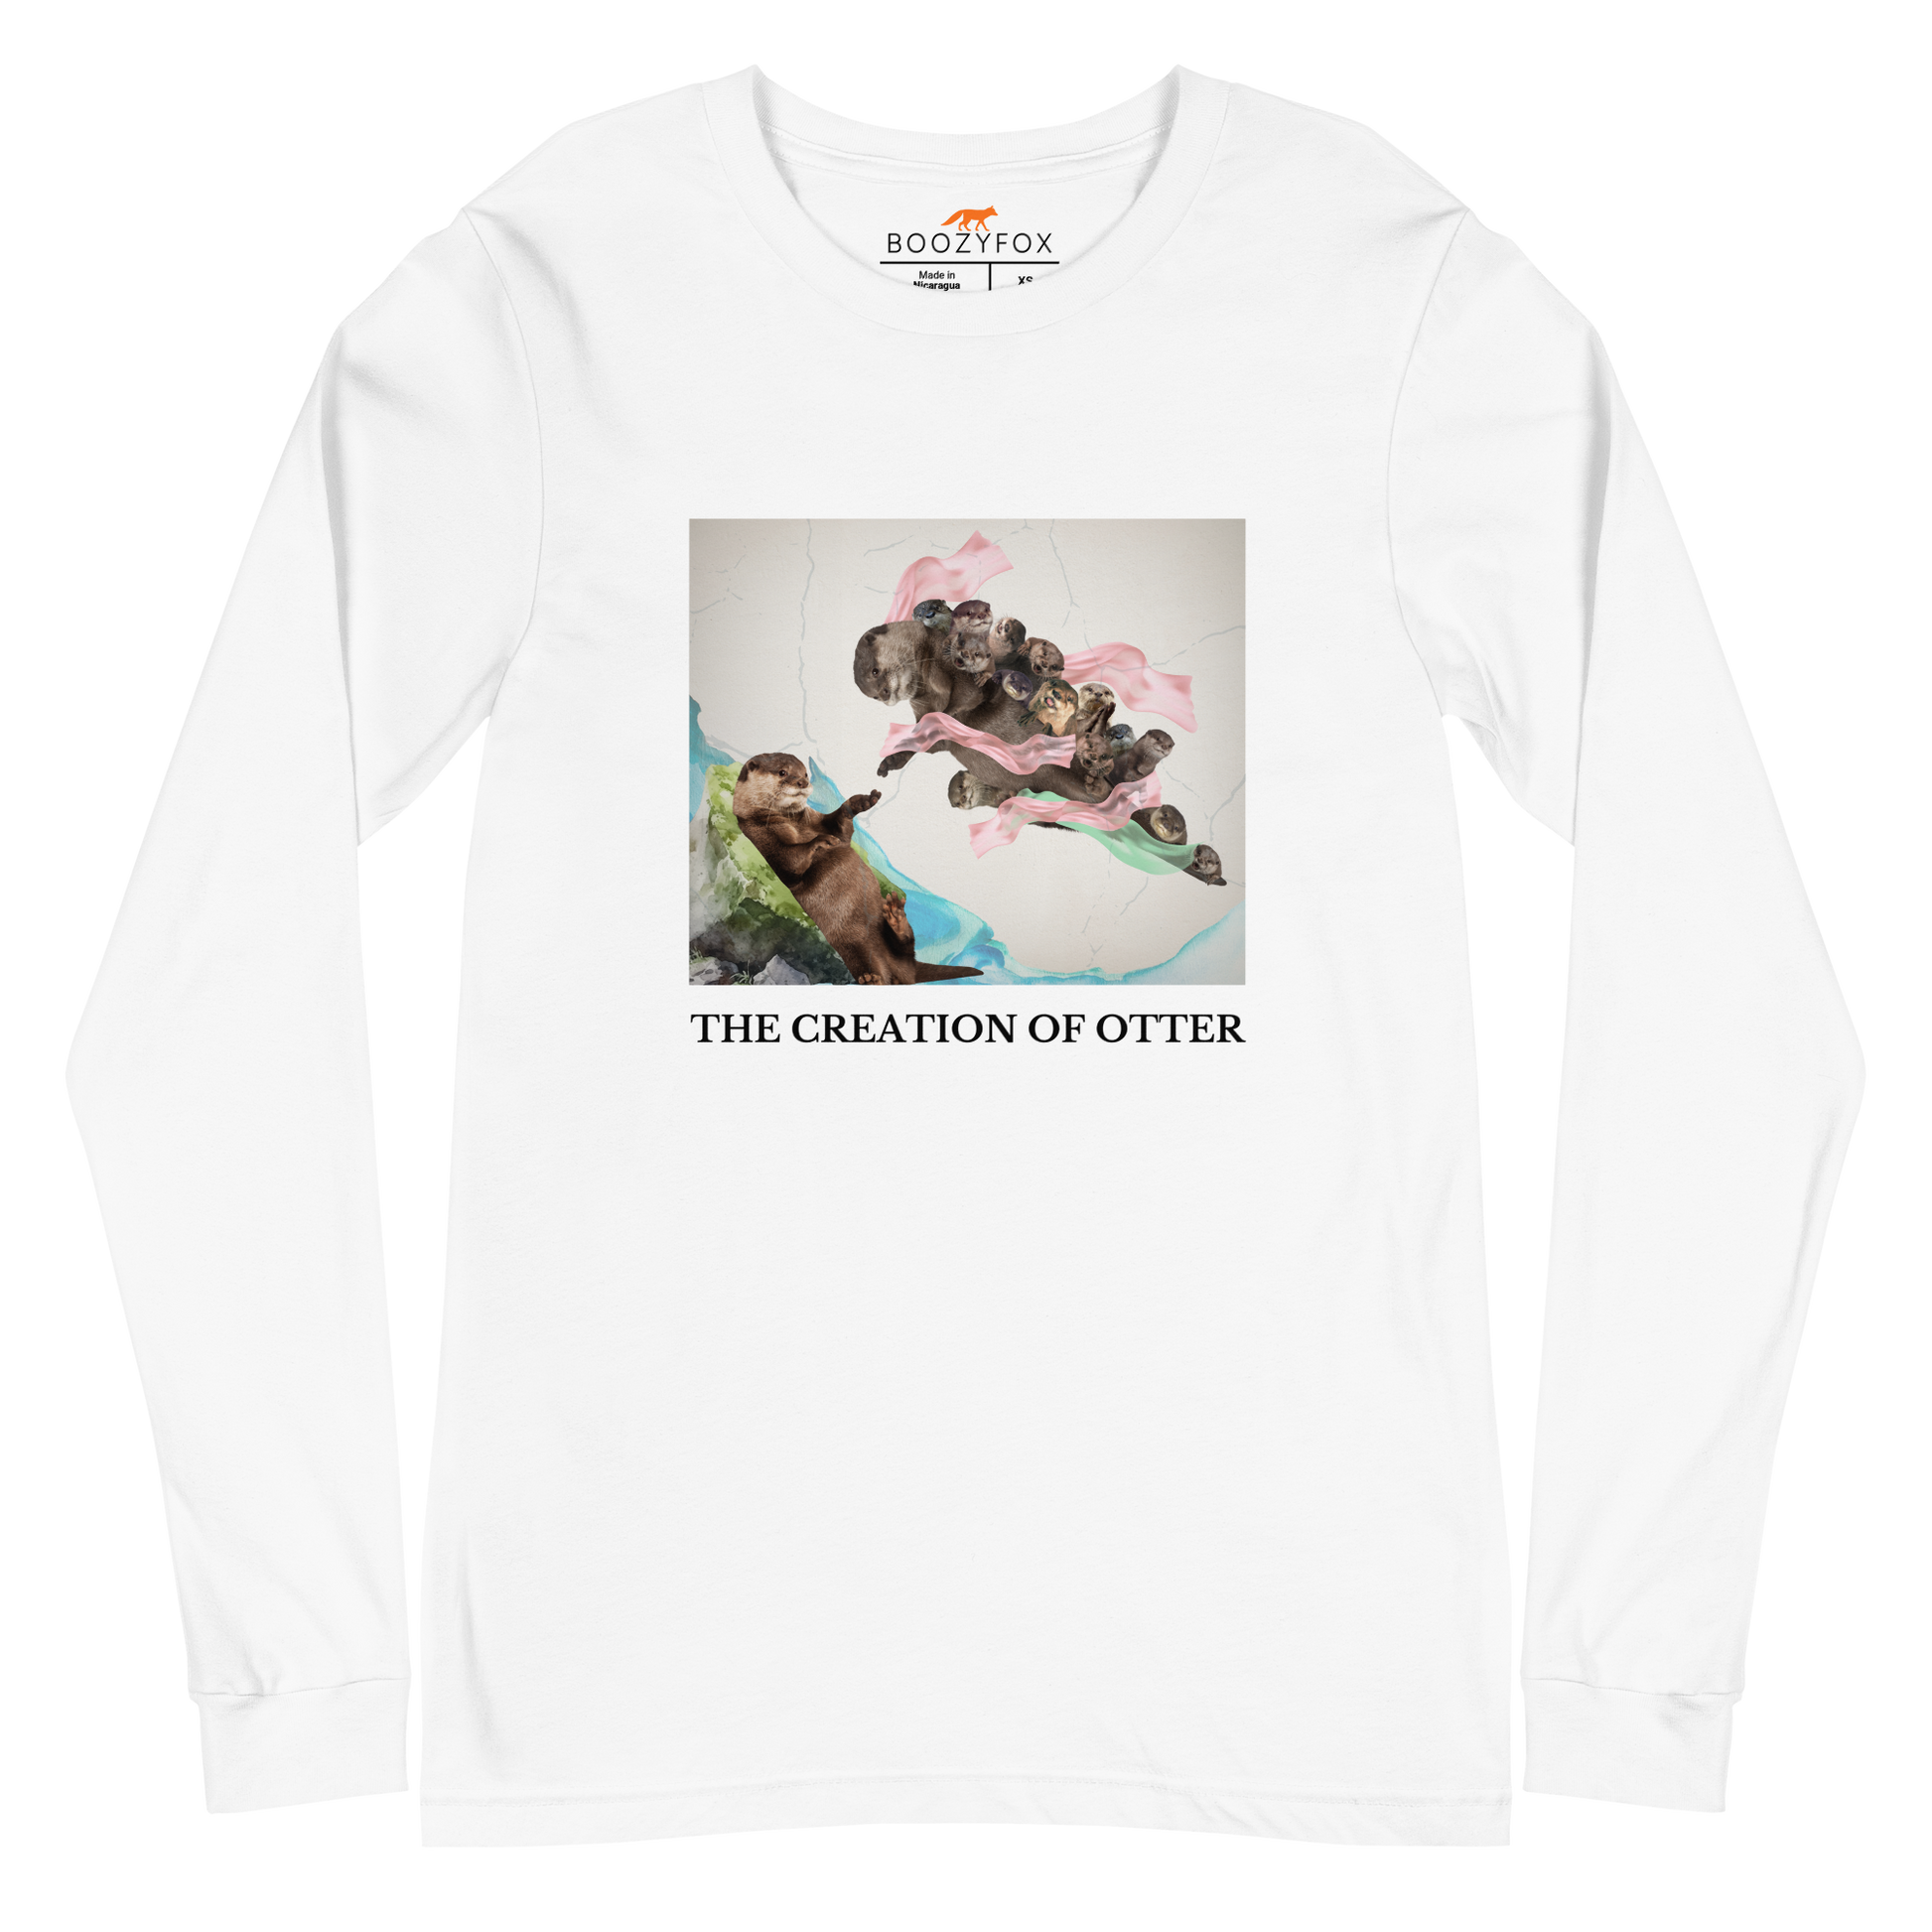 White Otter Long Sleeve Tee featuring a playful The Creation of Otter parody of Michelangelo's masterpiece - Artsy/Funny Otter Long Sleeve Graphic Tees - Boozy Fox